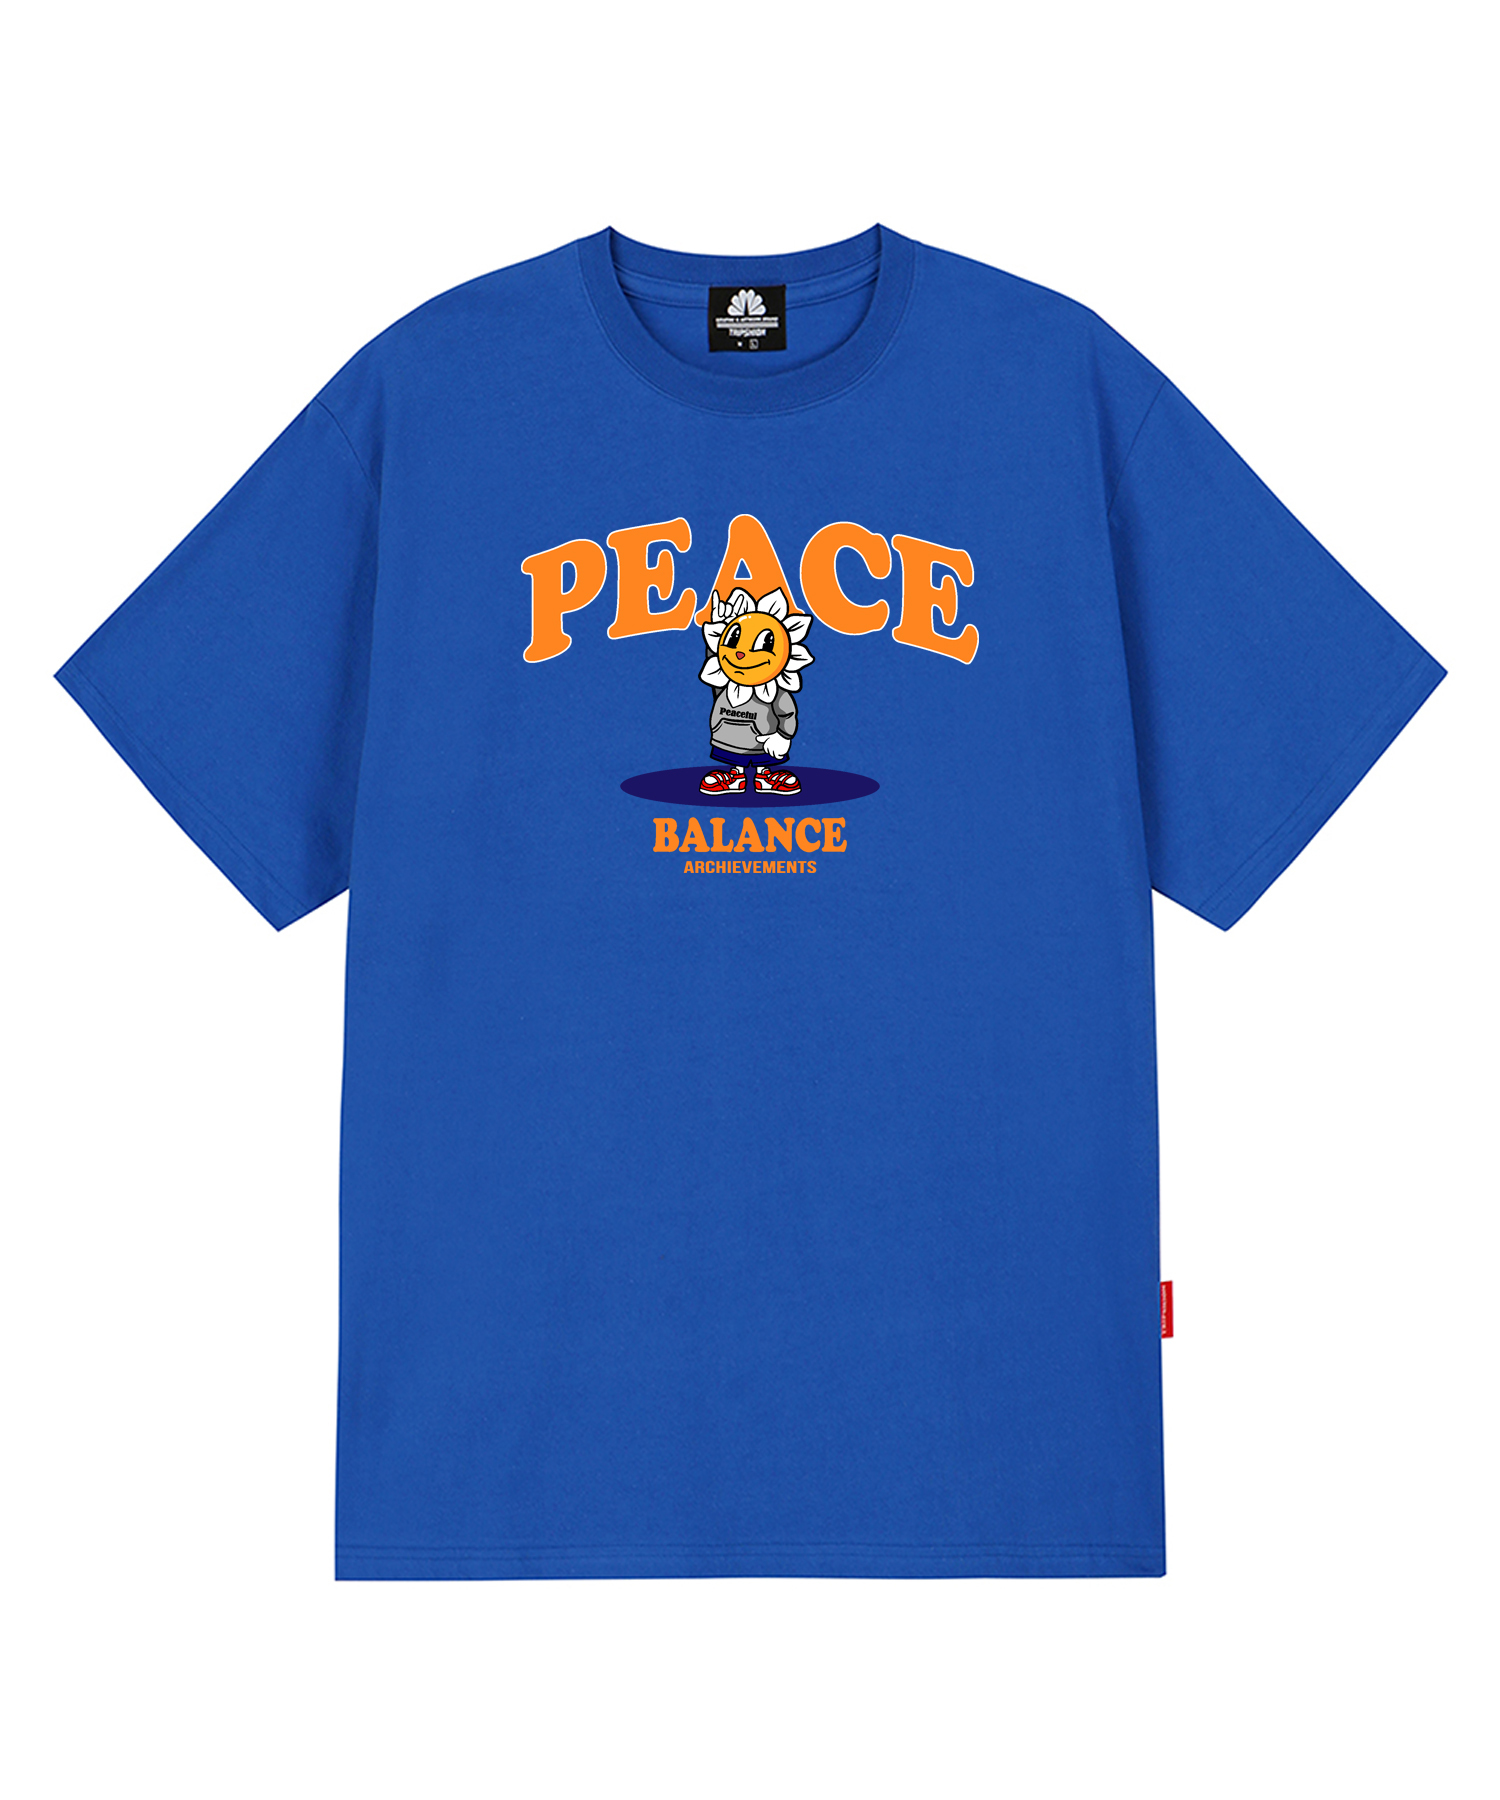 PEACE TIGER GRAPHIC T-SHIRTS - BLUE